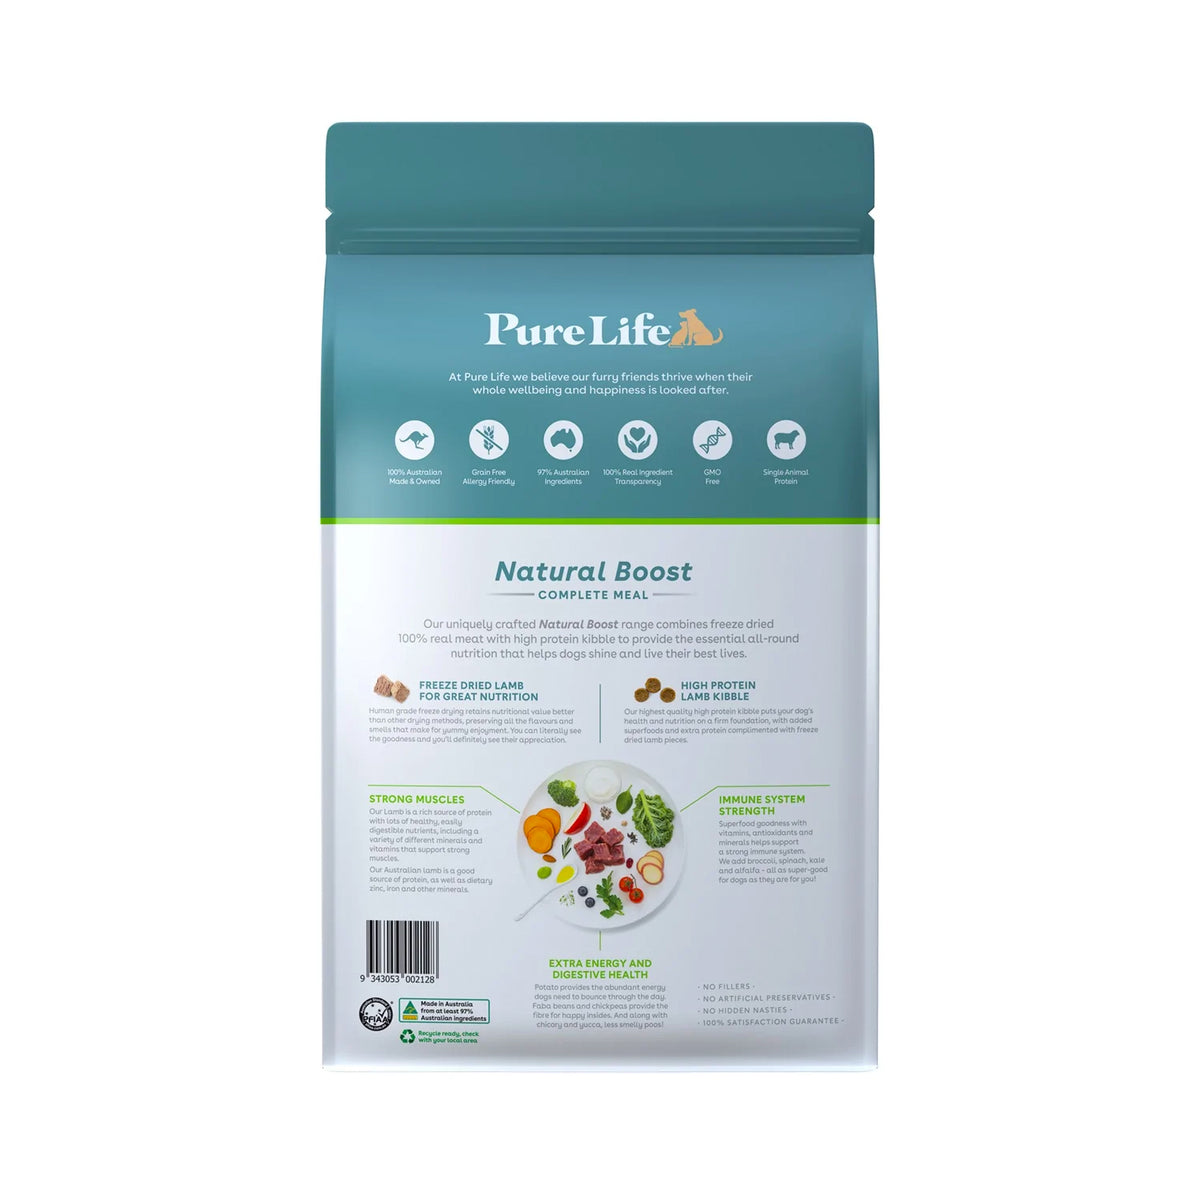 Pure Life Australian Lamb for Adult Dogs